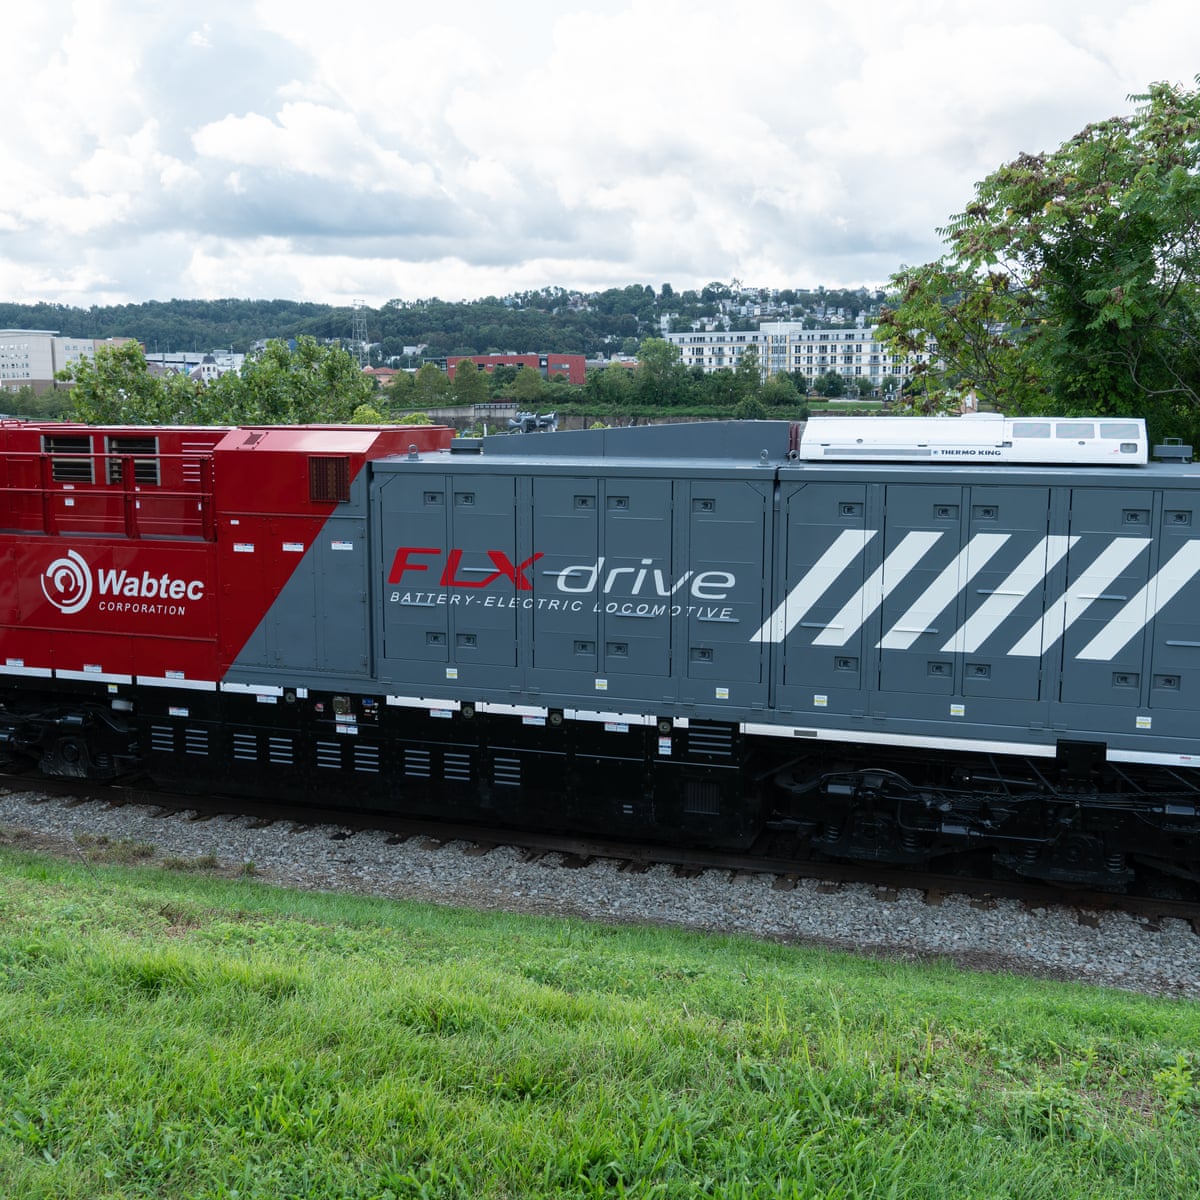 Dramatically more powerful&#39;: world&#39;s first battery-electric freight train  unveiled | Pennsylvania | The Guardian